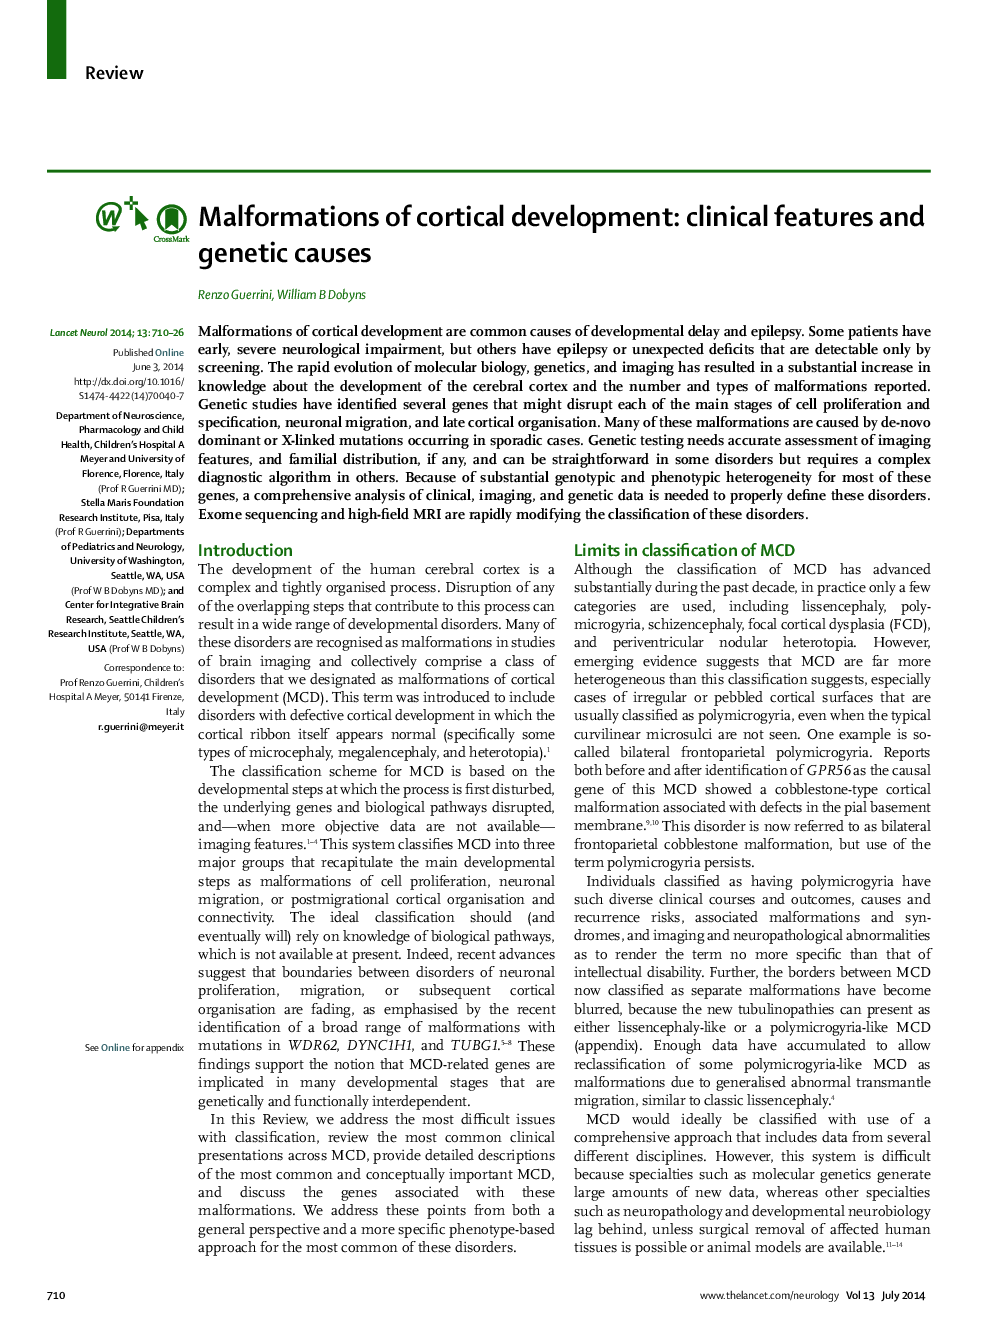 Malformations of cortical development: clinical features and genetic causes